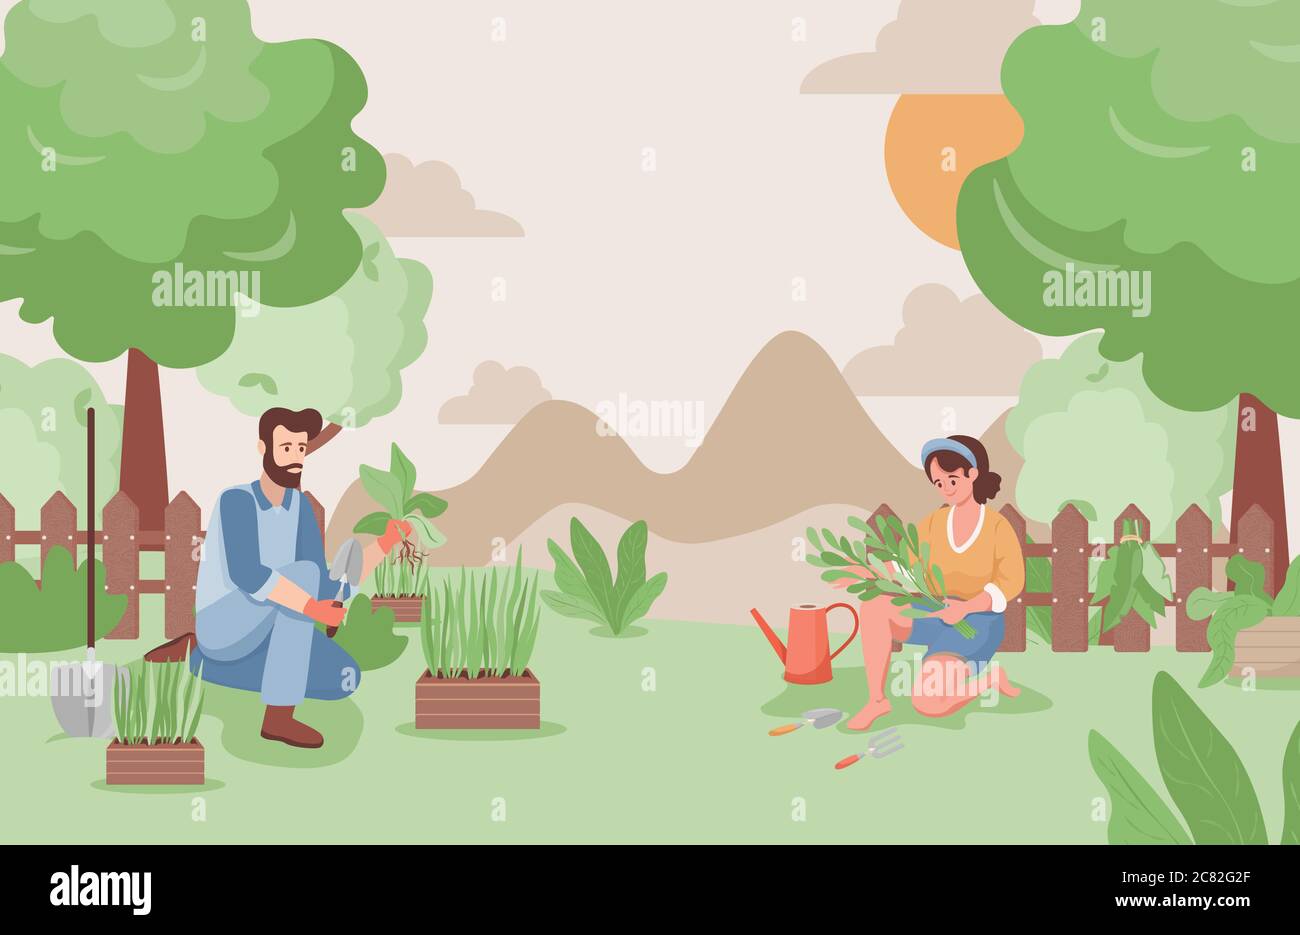 Happy man and woman working in the garden in summer vector flat illustration. Farmers or gardeners planting trees or flowers. Summer countryside landscape with green trees, hills, and bushes. Stock Vector